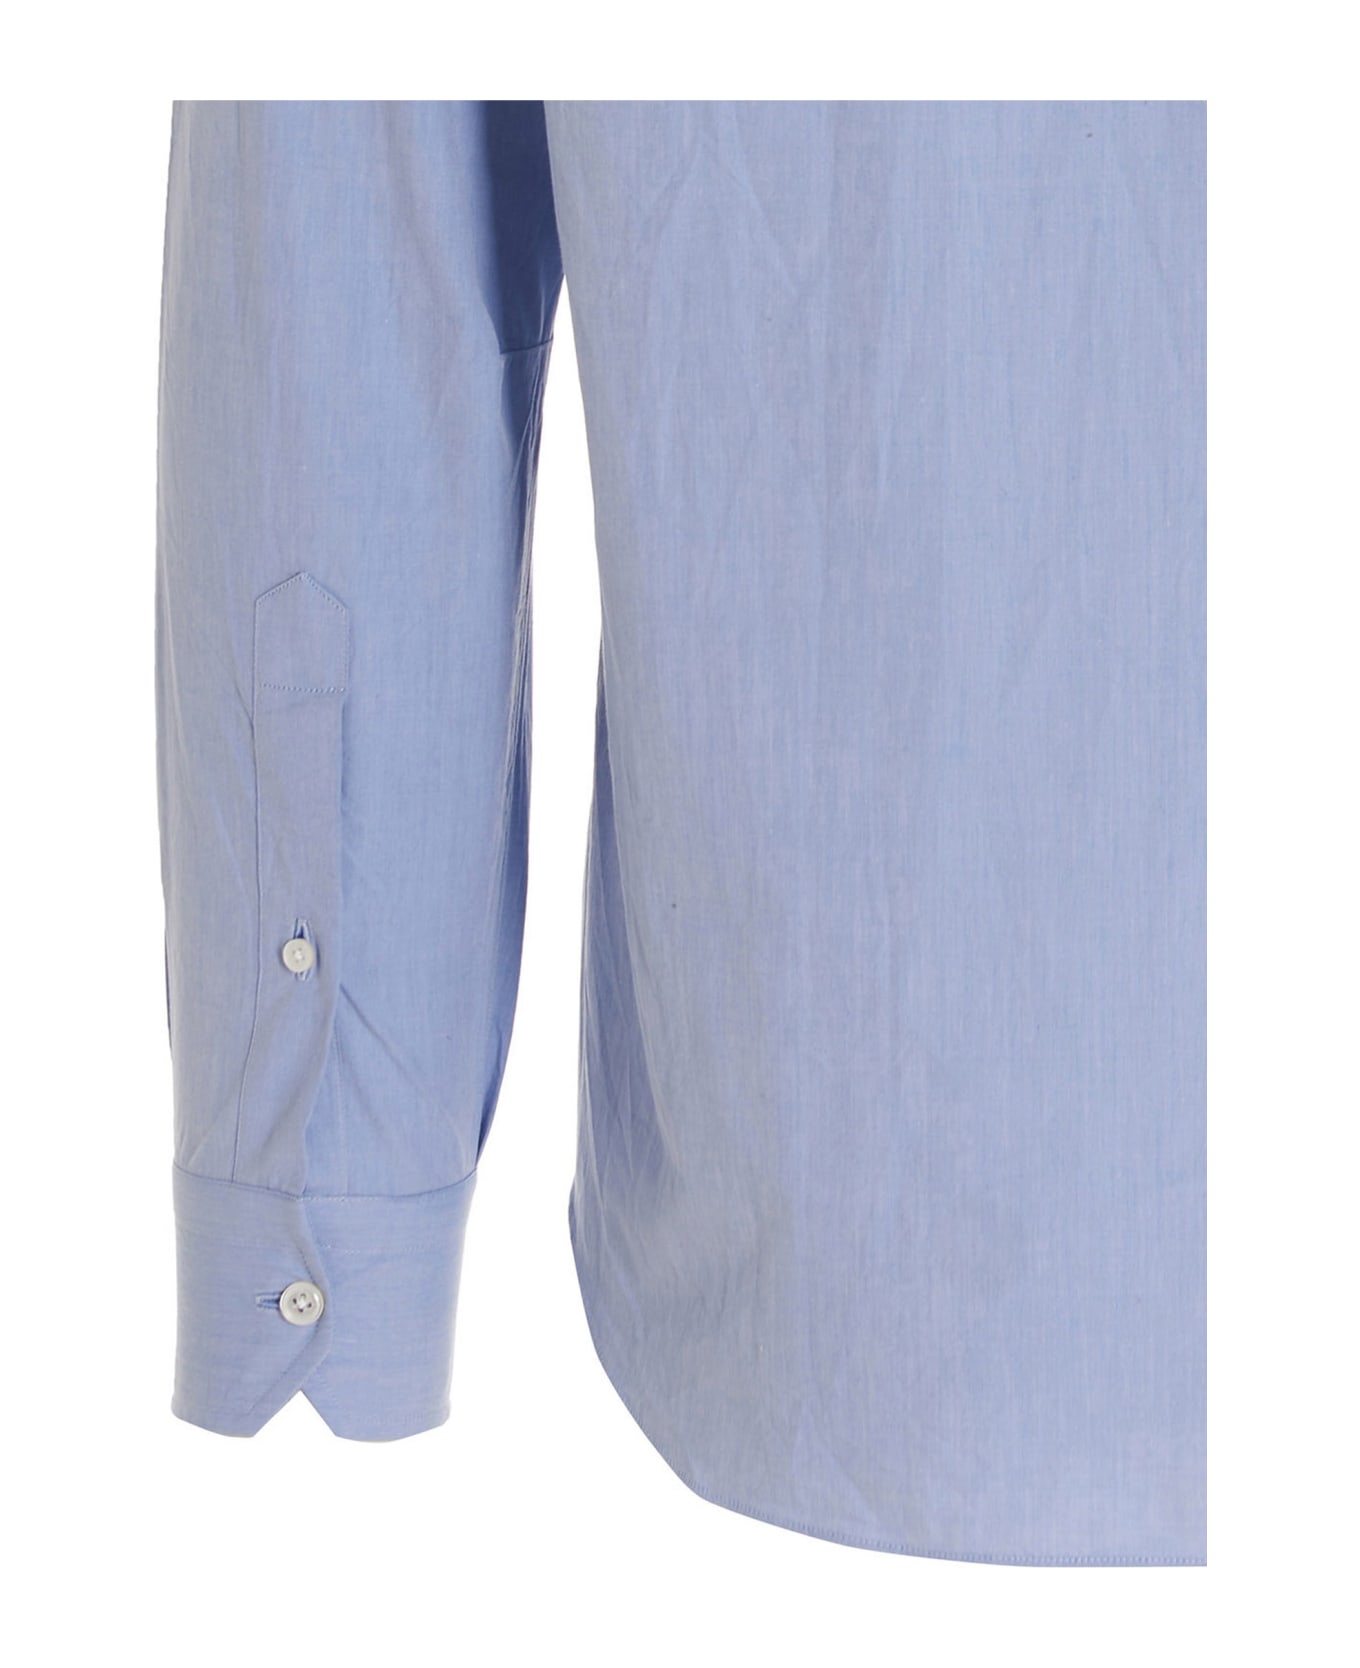 Salvatore Piccolo Rounded Collar Shirt - Light Blue シャツ